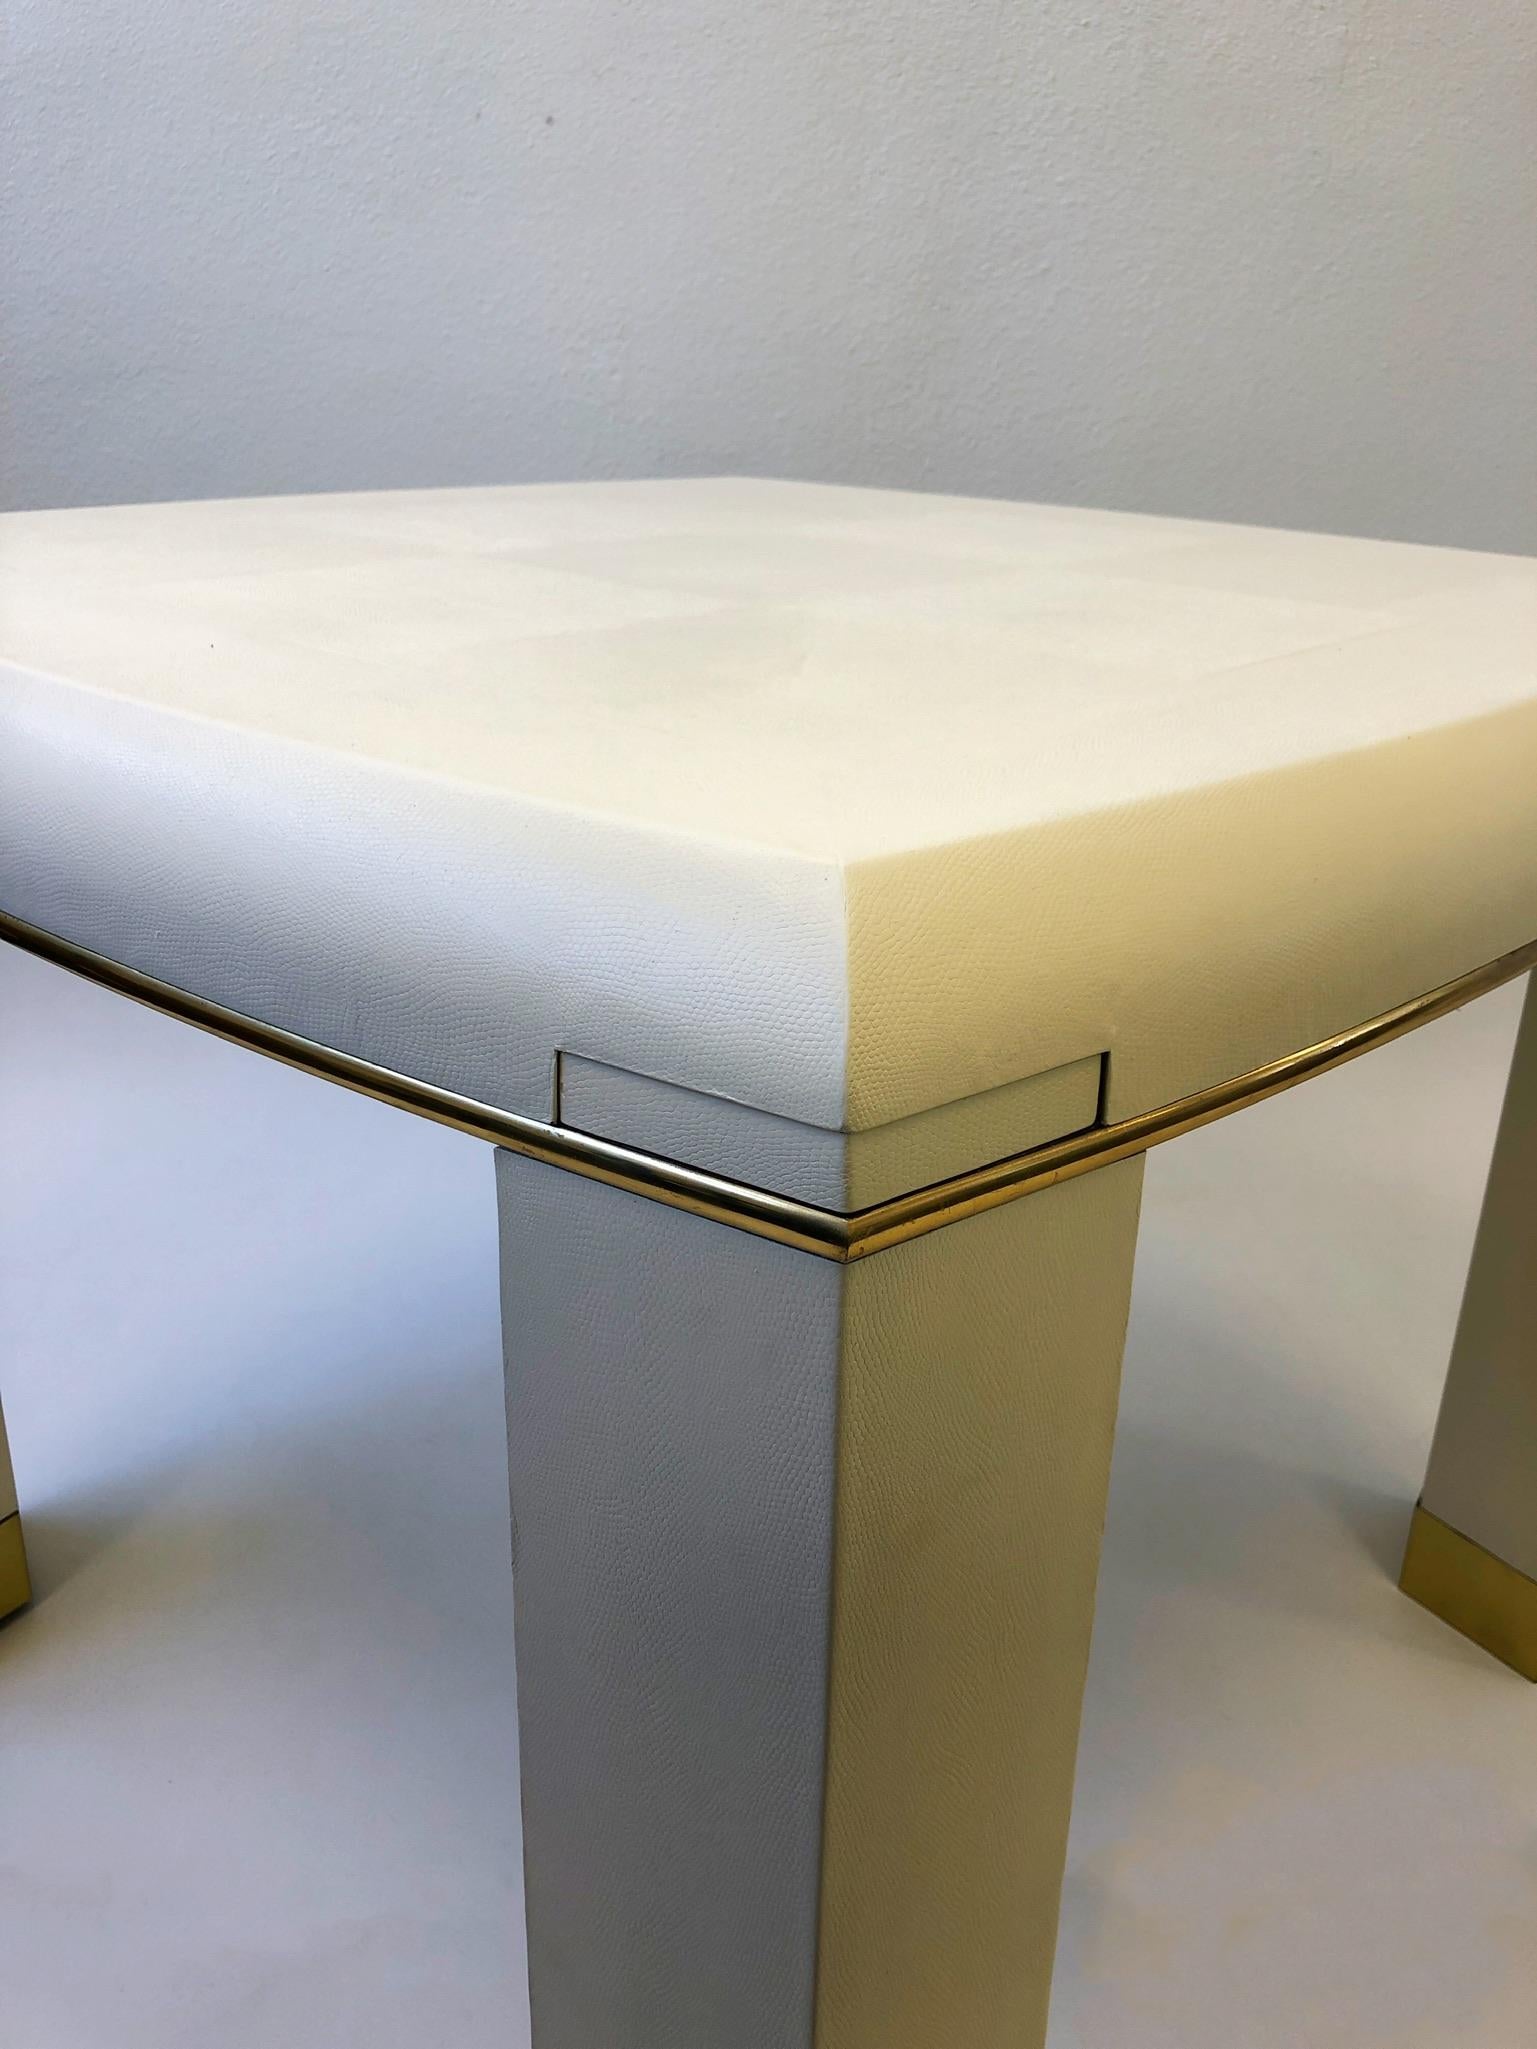 Late 20th Century Off-White Snake Leather and Brass Game Table with Drink Holder, Springer Style For Sale